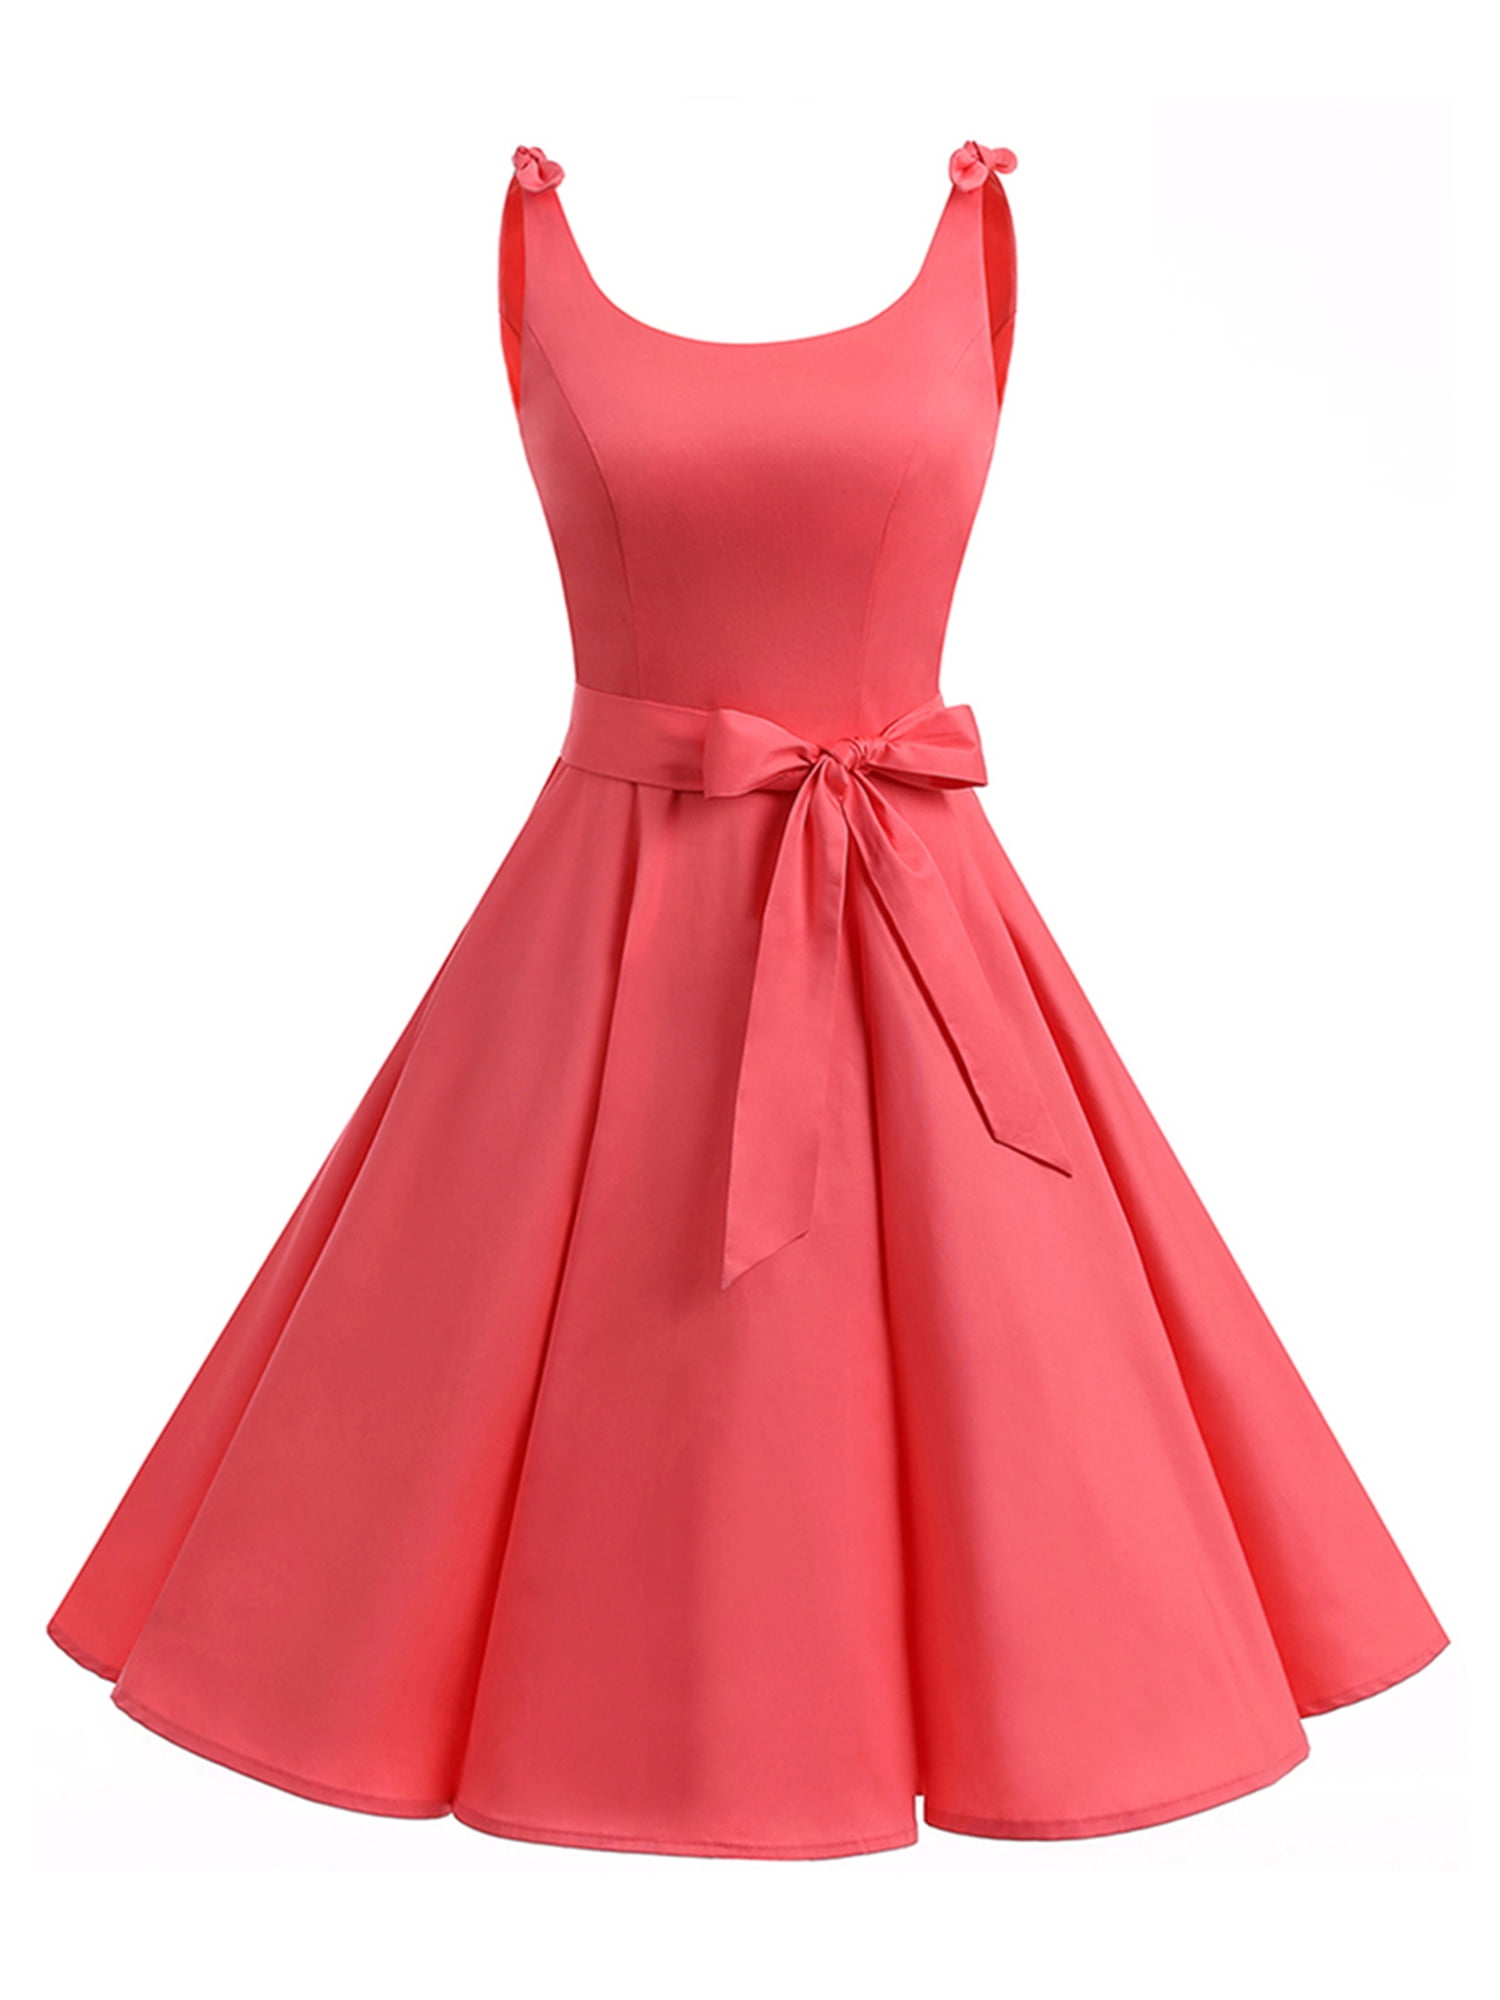 1950s Vintage Hepburn Cocktail Party Tea Dress with Ruffle Cap-Sleeves Solid Midi Dress RAINED-Women Swing A line Dress